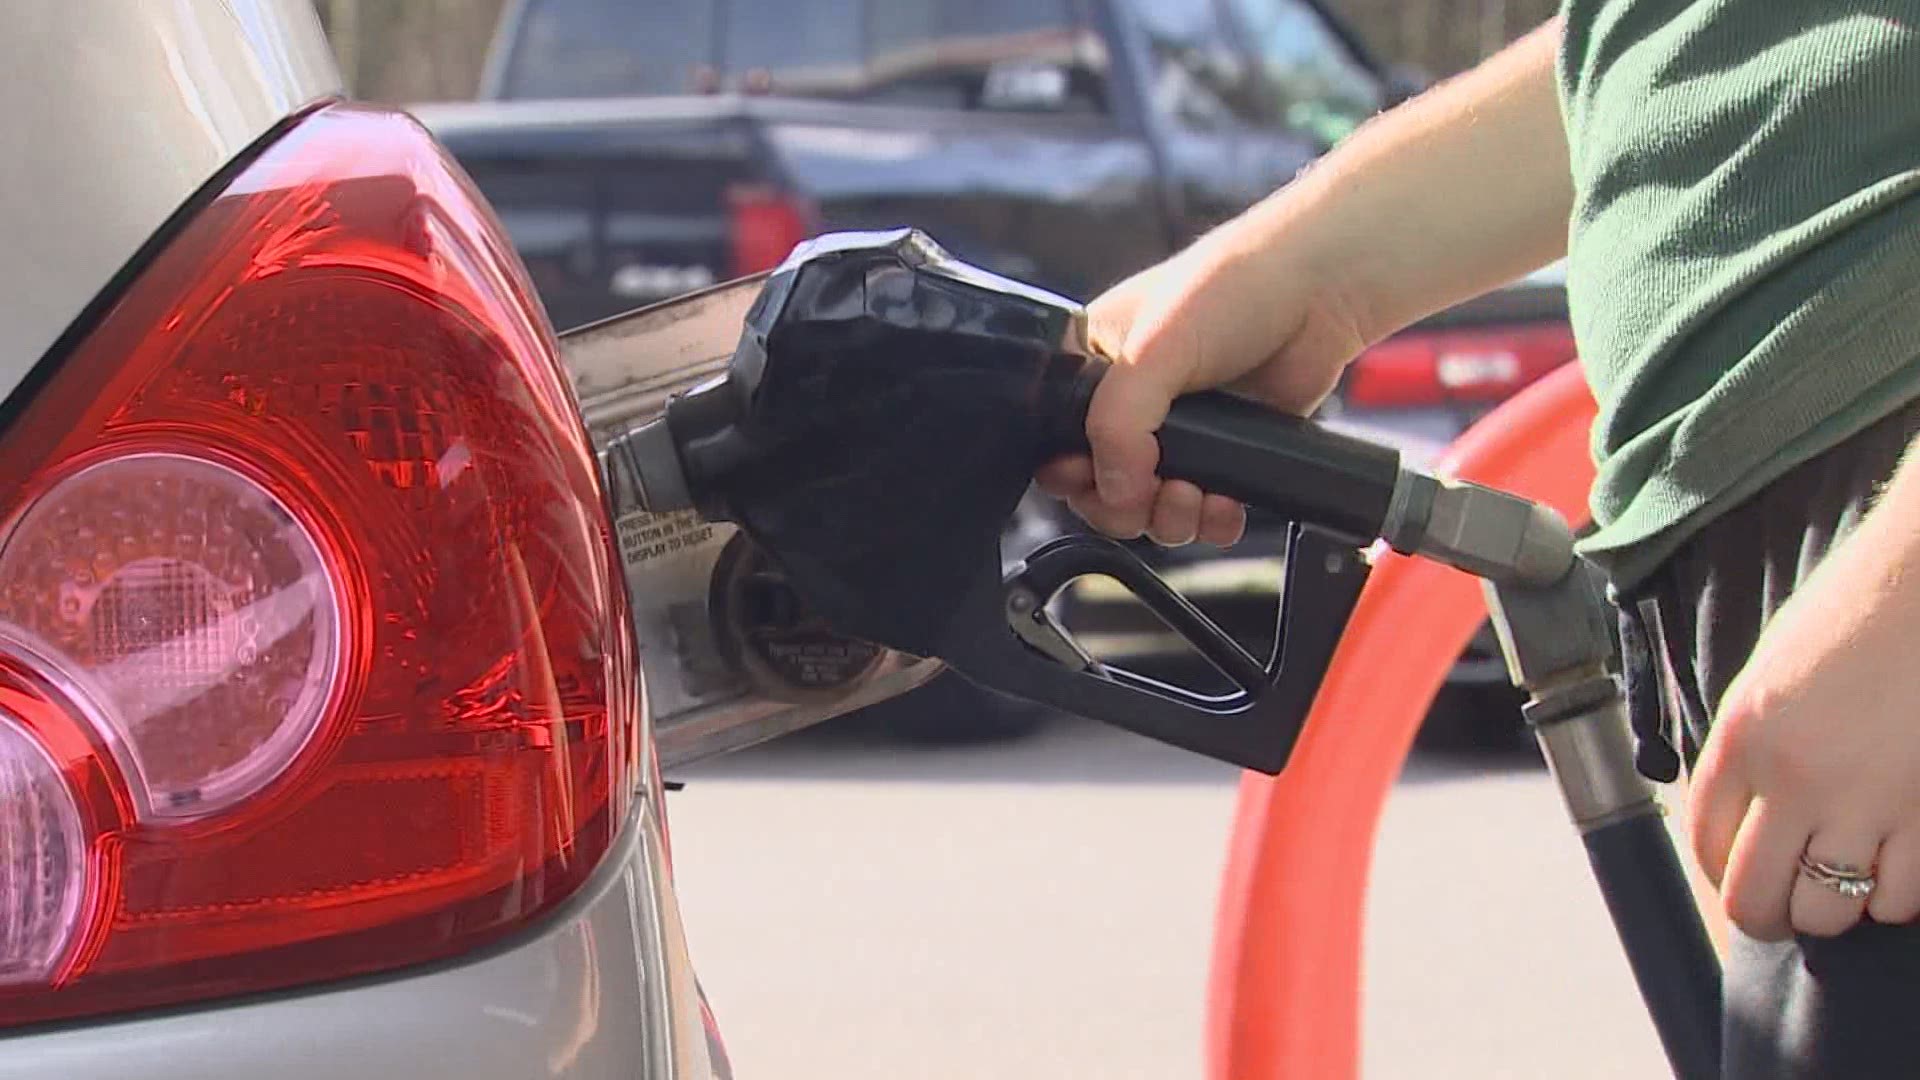 Republican critics cited a 2019 study by the Puget Sound Clean Air Agency, which found a clean fuel standard could raise gasoline prices 57-cents a gallon.